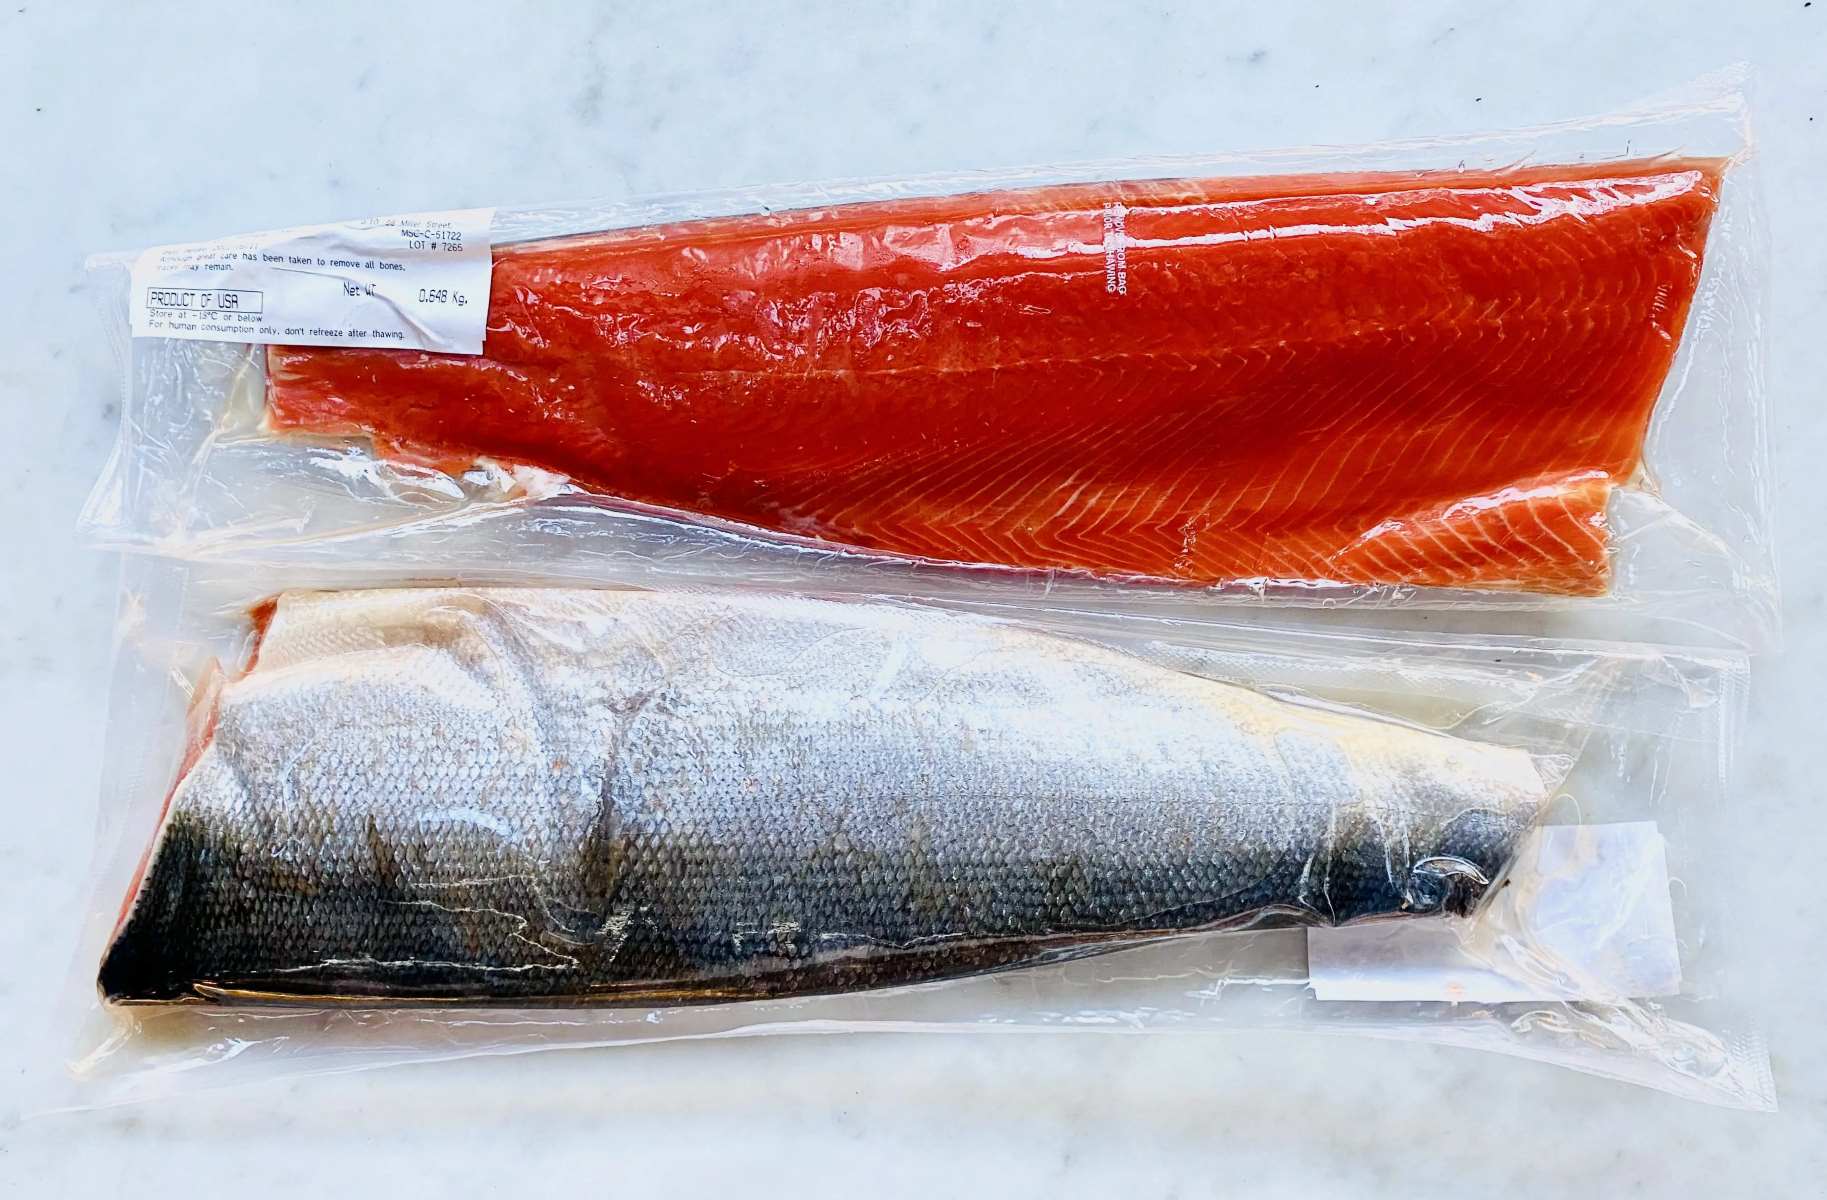 The Shocking Truth Behind The High Price Of Salmon In Southeast Asia